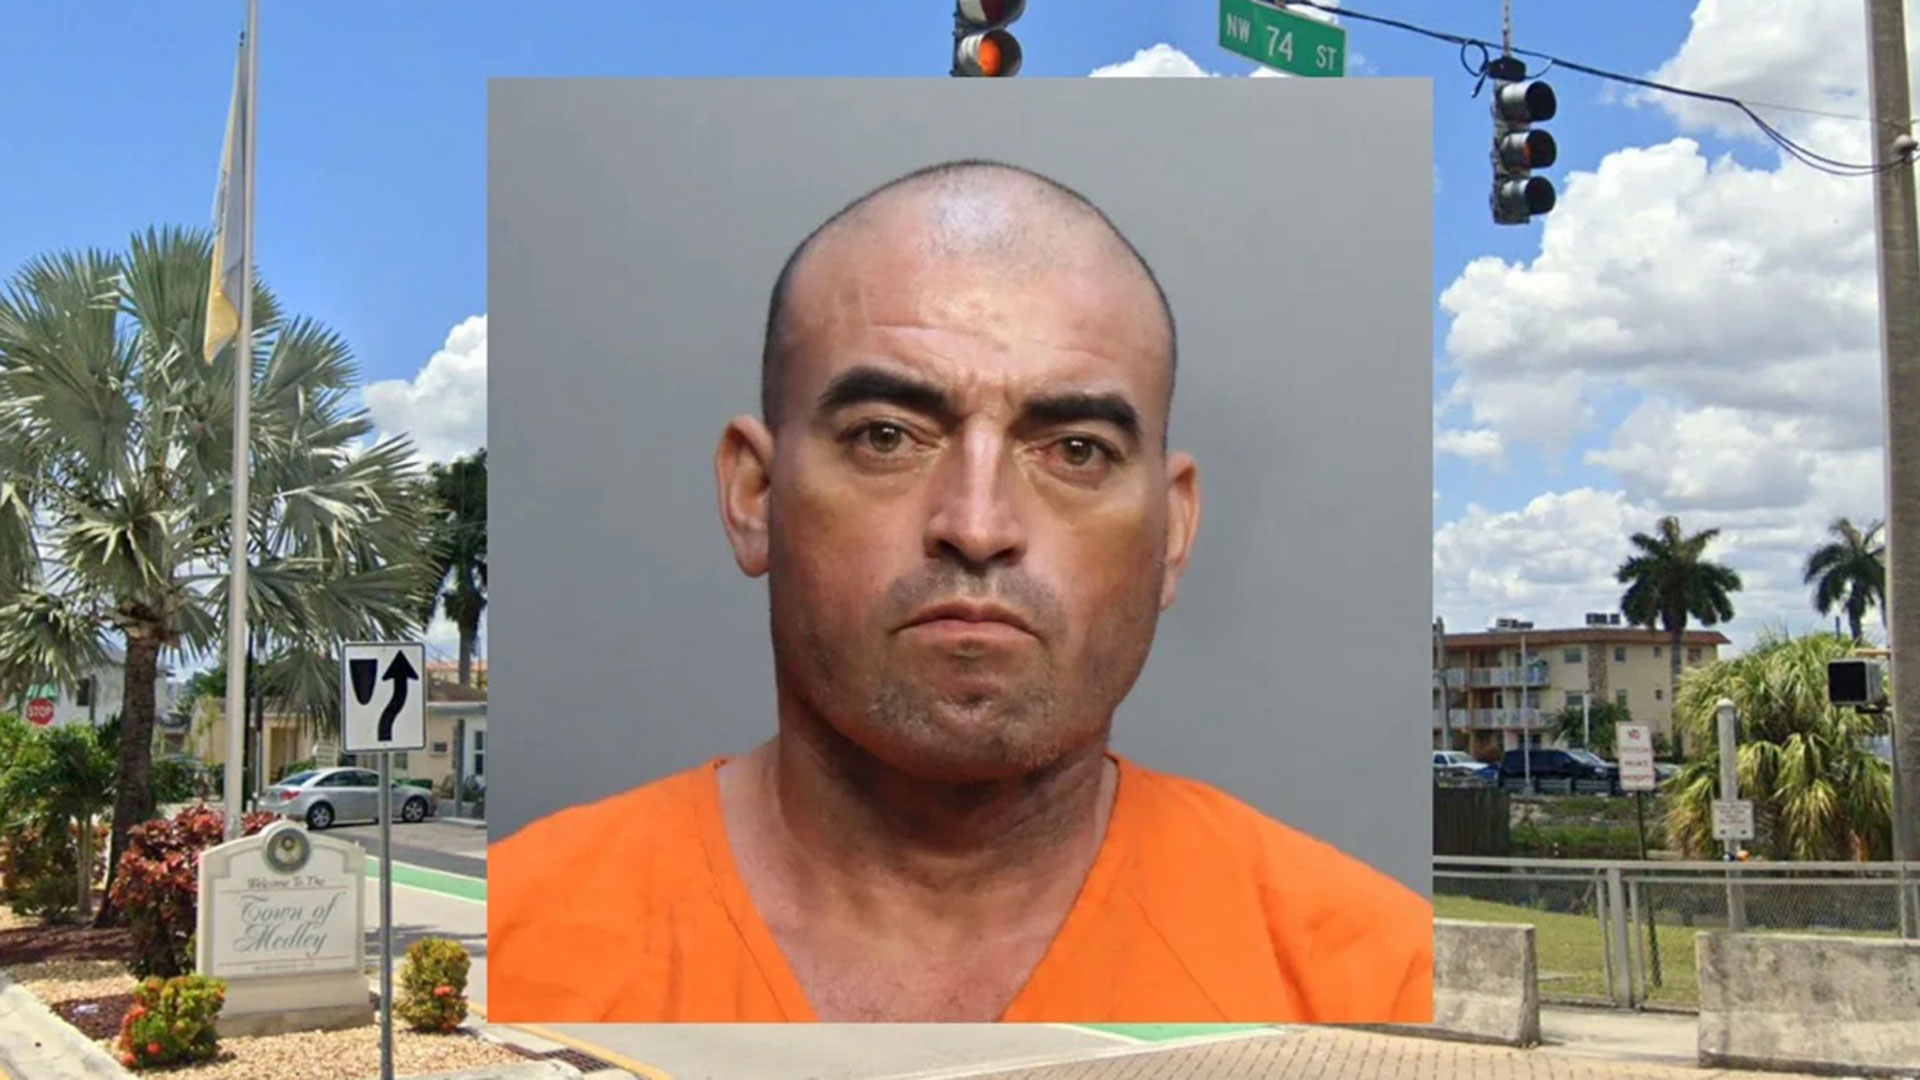 Roberto Hercules, arrested for attacking a woman in the street with a machete